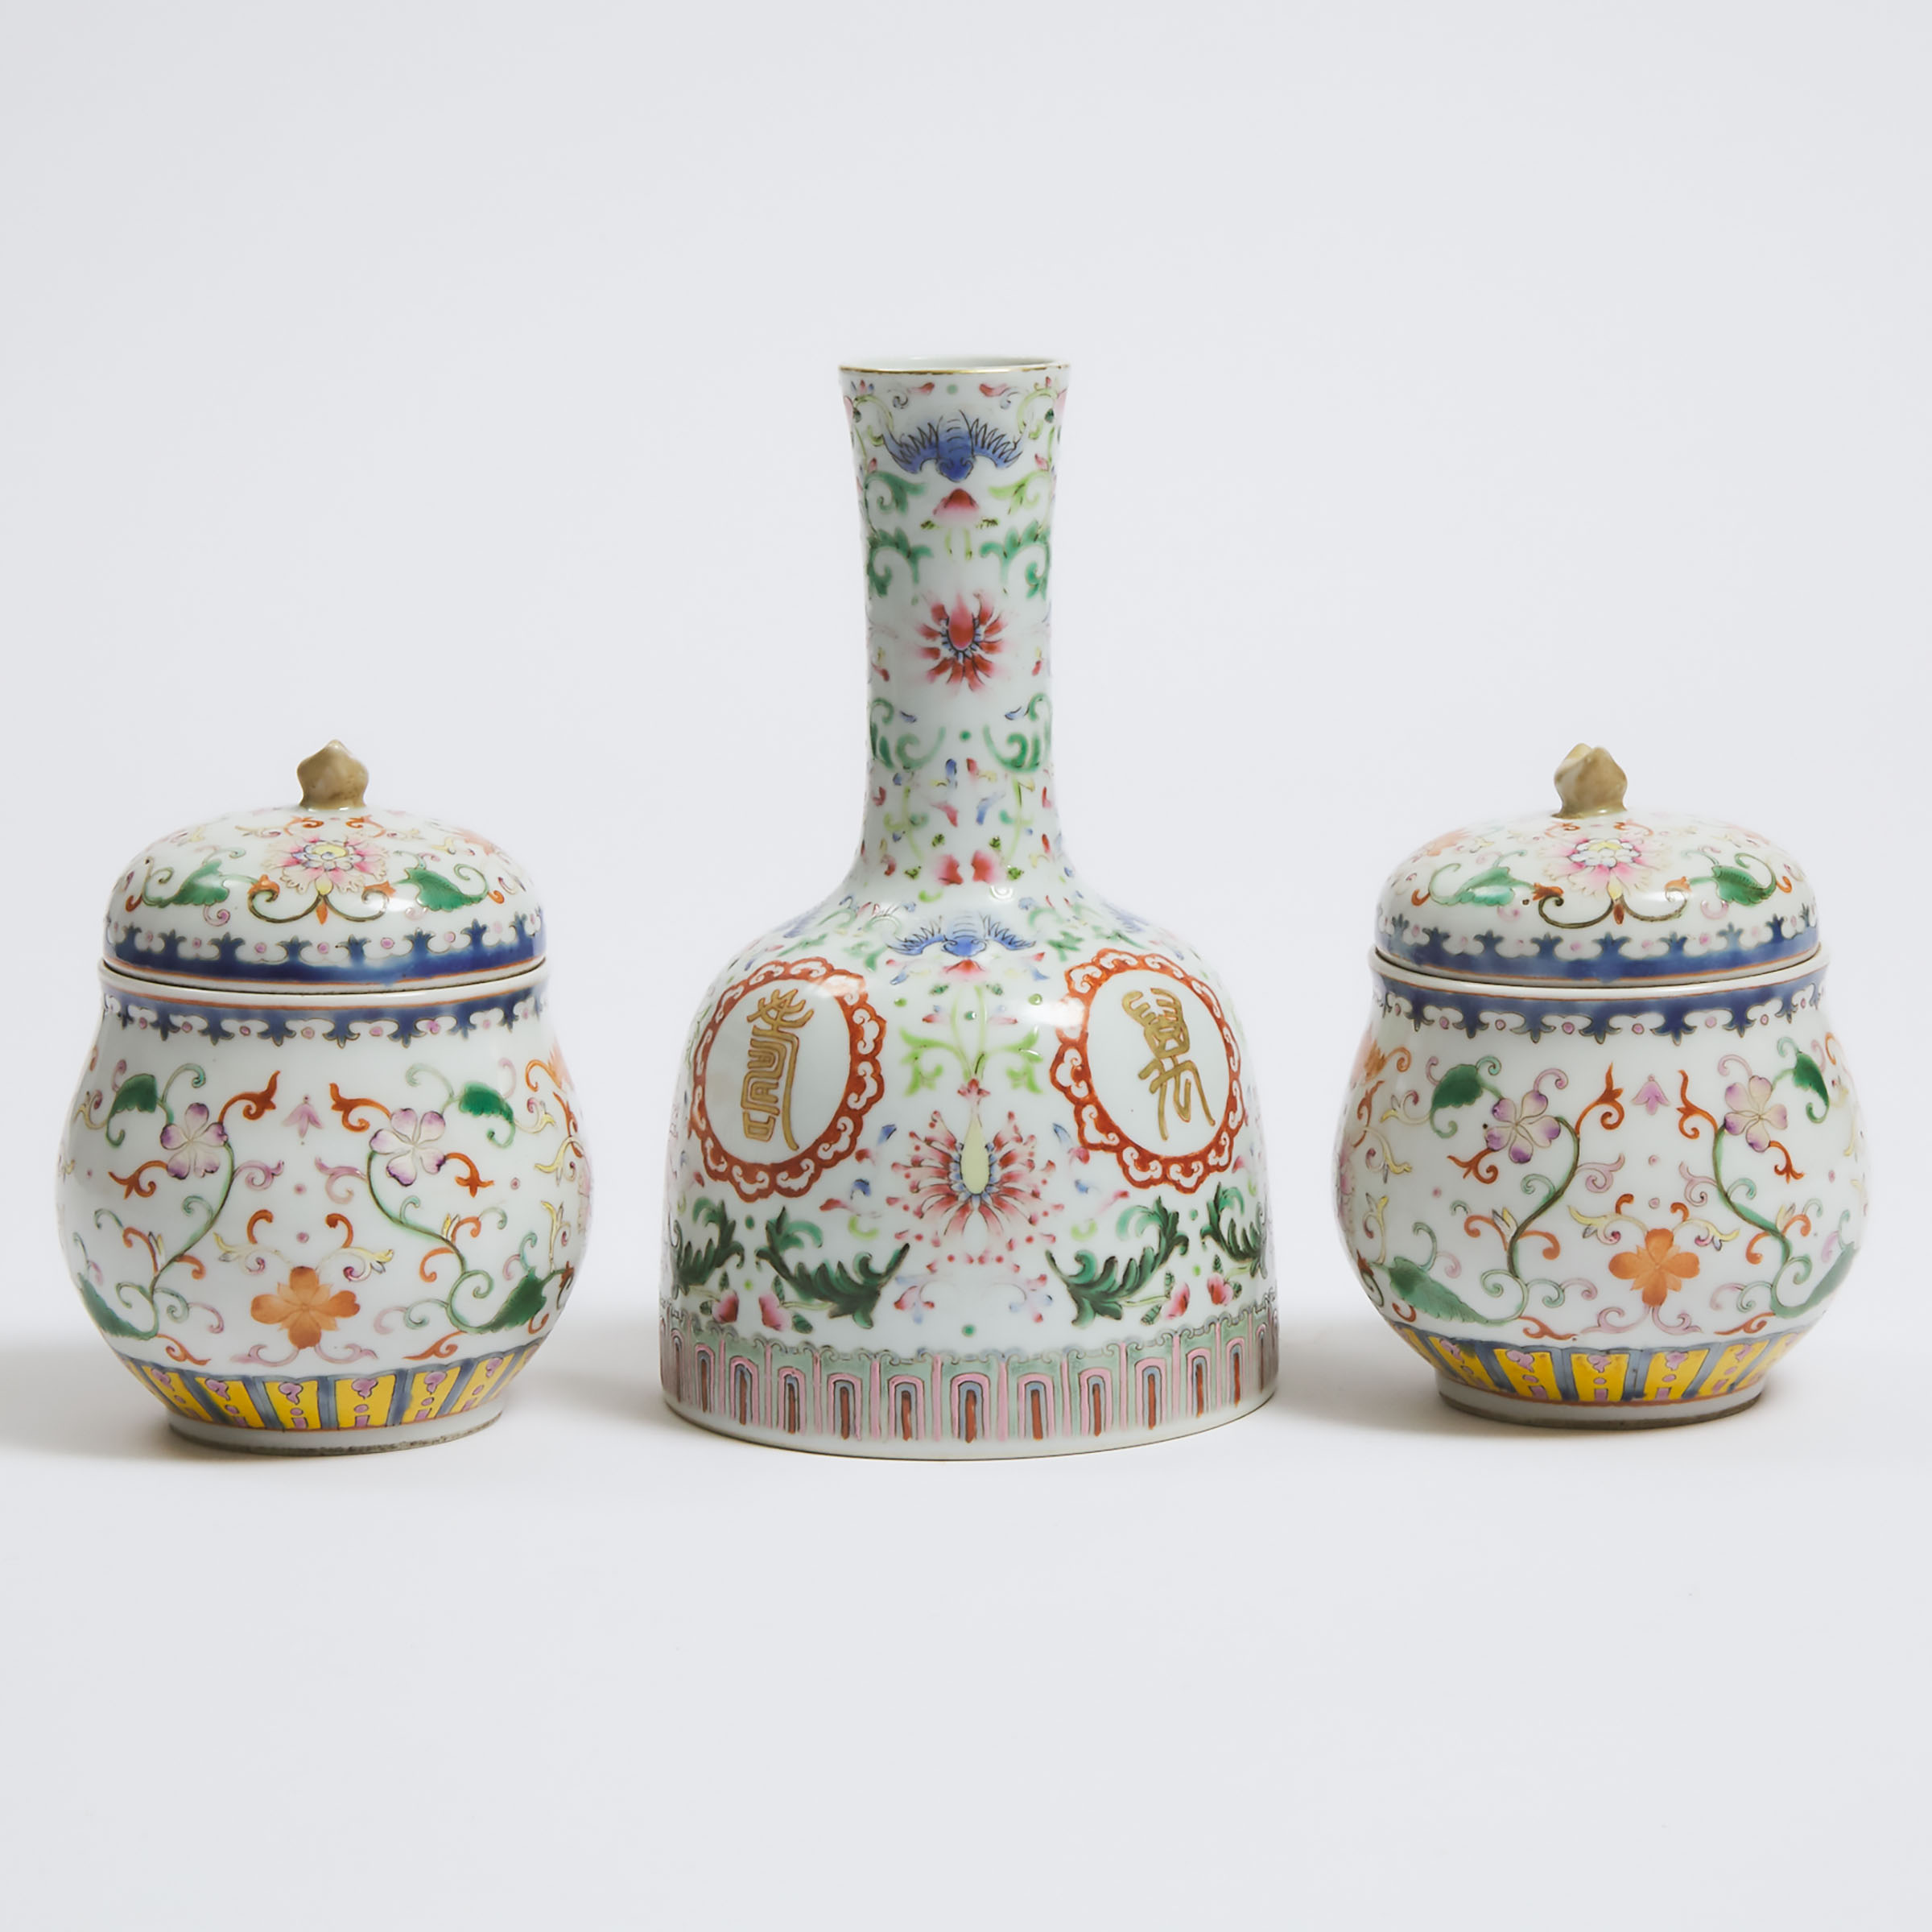 A Pair of Famille Rose Wine Cup Warmers, Together With a Mallet Vase, Qing Dynasty, Late 19th Century